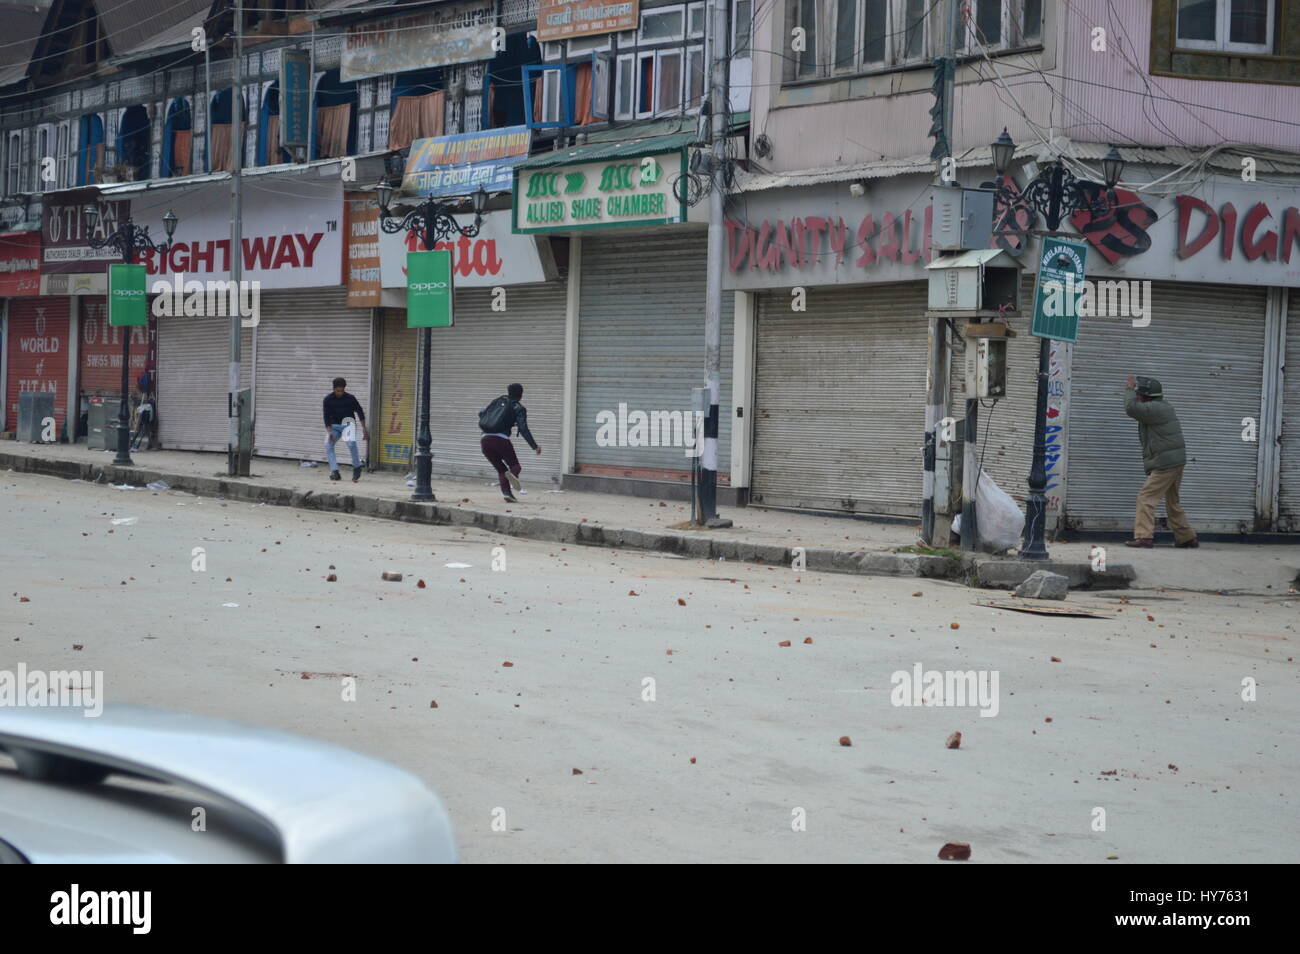 Srinagar, India. 01st Apr, 2017. Paramilitary soldiers rush near the Lal Chowk in Srinagar on Saturday after few gunshots were heard near Taj Hotel in historical Business hub Lal Chowk in Srinagar in India controlled Kashmir, on 1 April 2017 as Kashmiri youth protesters heavy stone pelting at Paramilitary and police and police use heavy teargas shelling to dispurse kashmiri protesters assemble around commercial areas in the Srinagar city. Credit: Zahid Hussain Bhat/Pacific Press/Alamy Live News Stock Photo